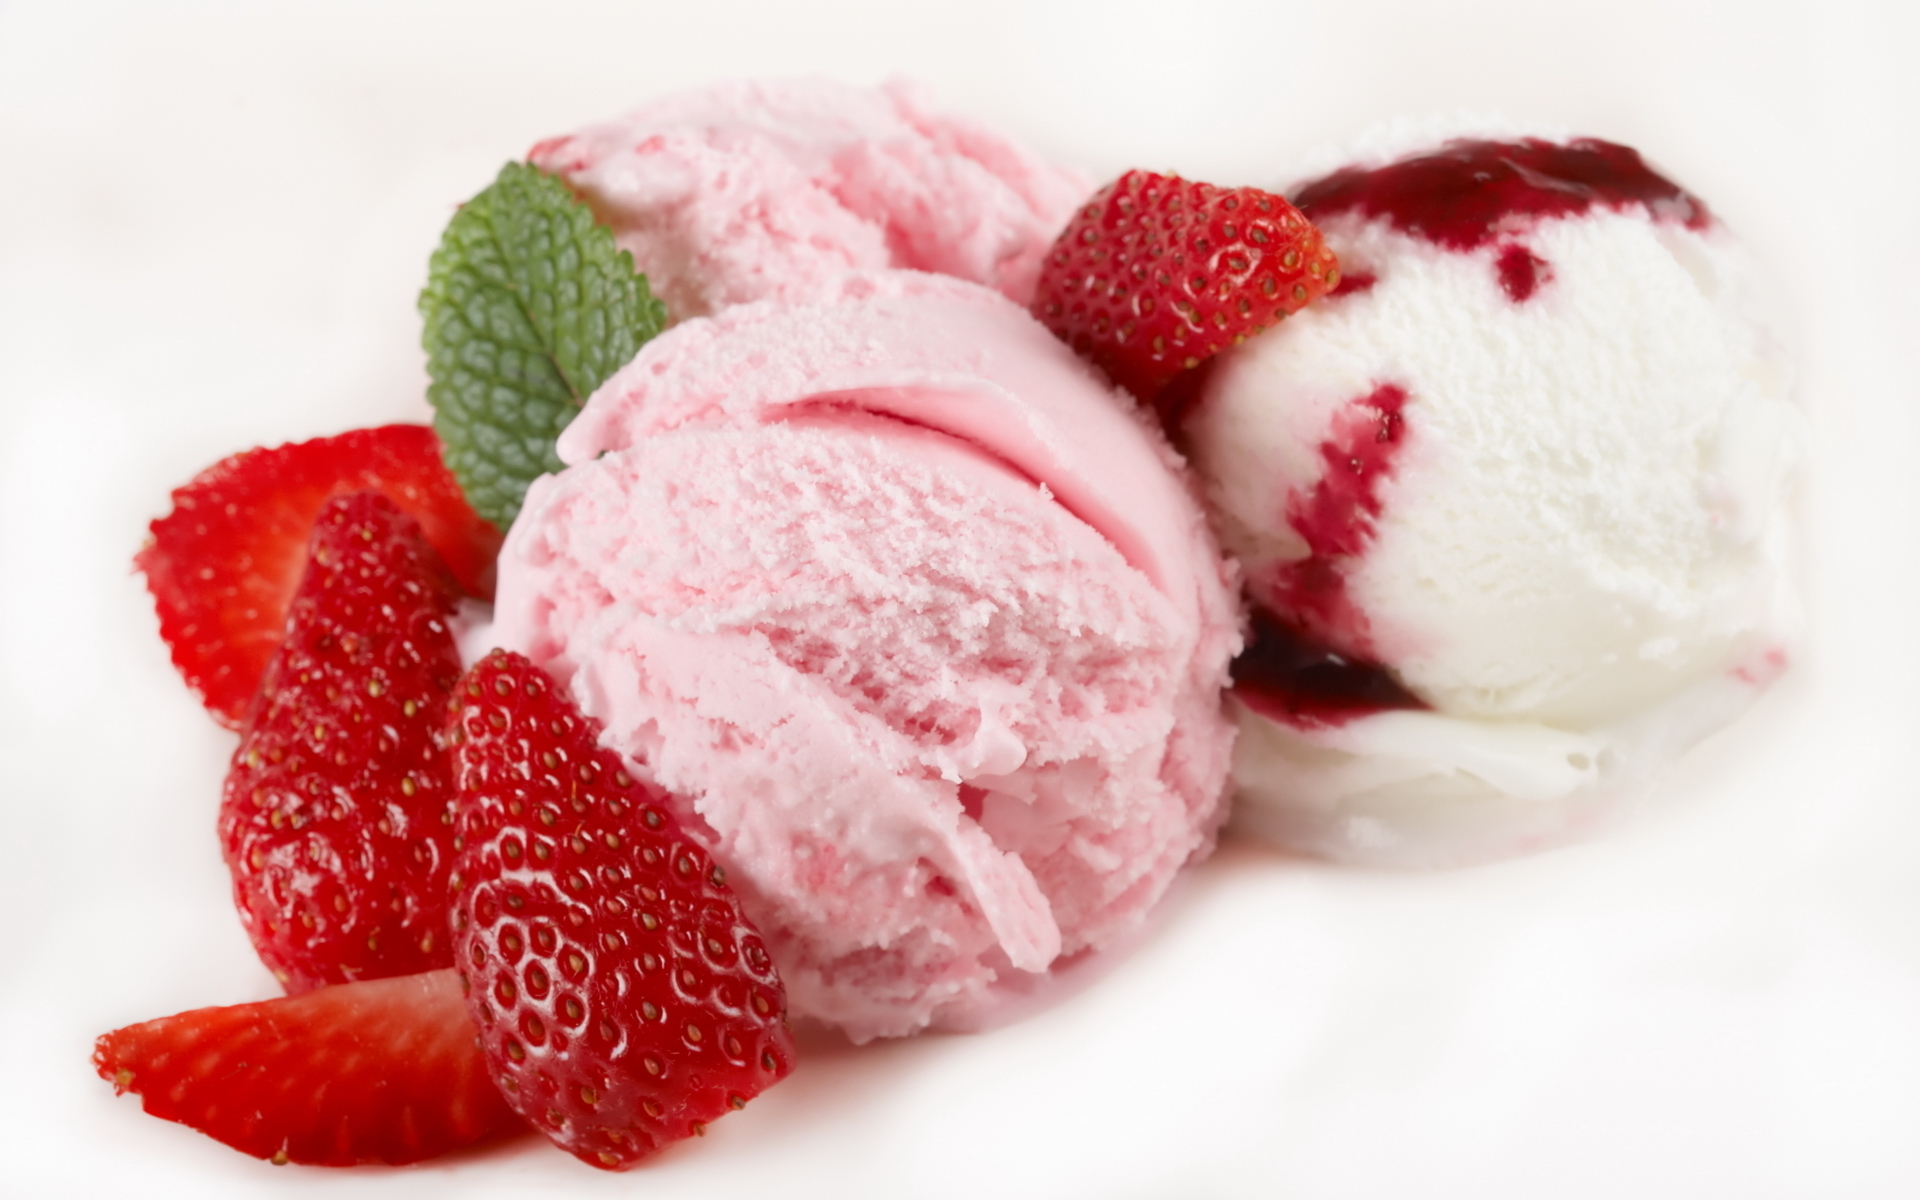 Ice cream with strawberries wallpapers and images - wallpapers ...